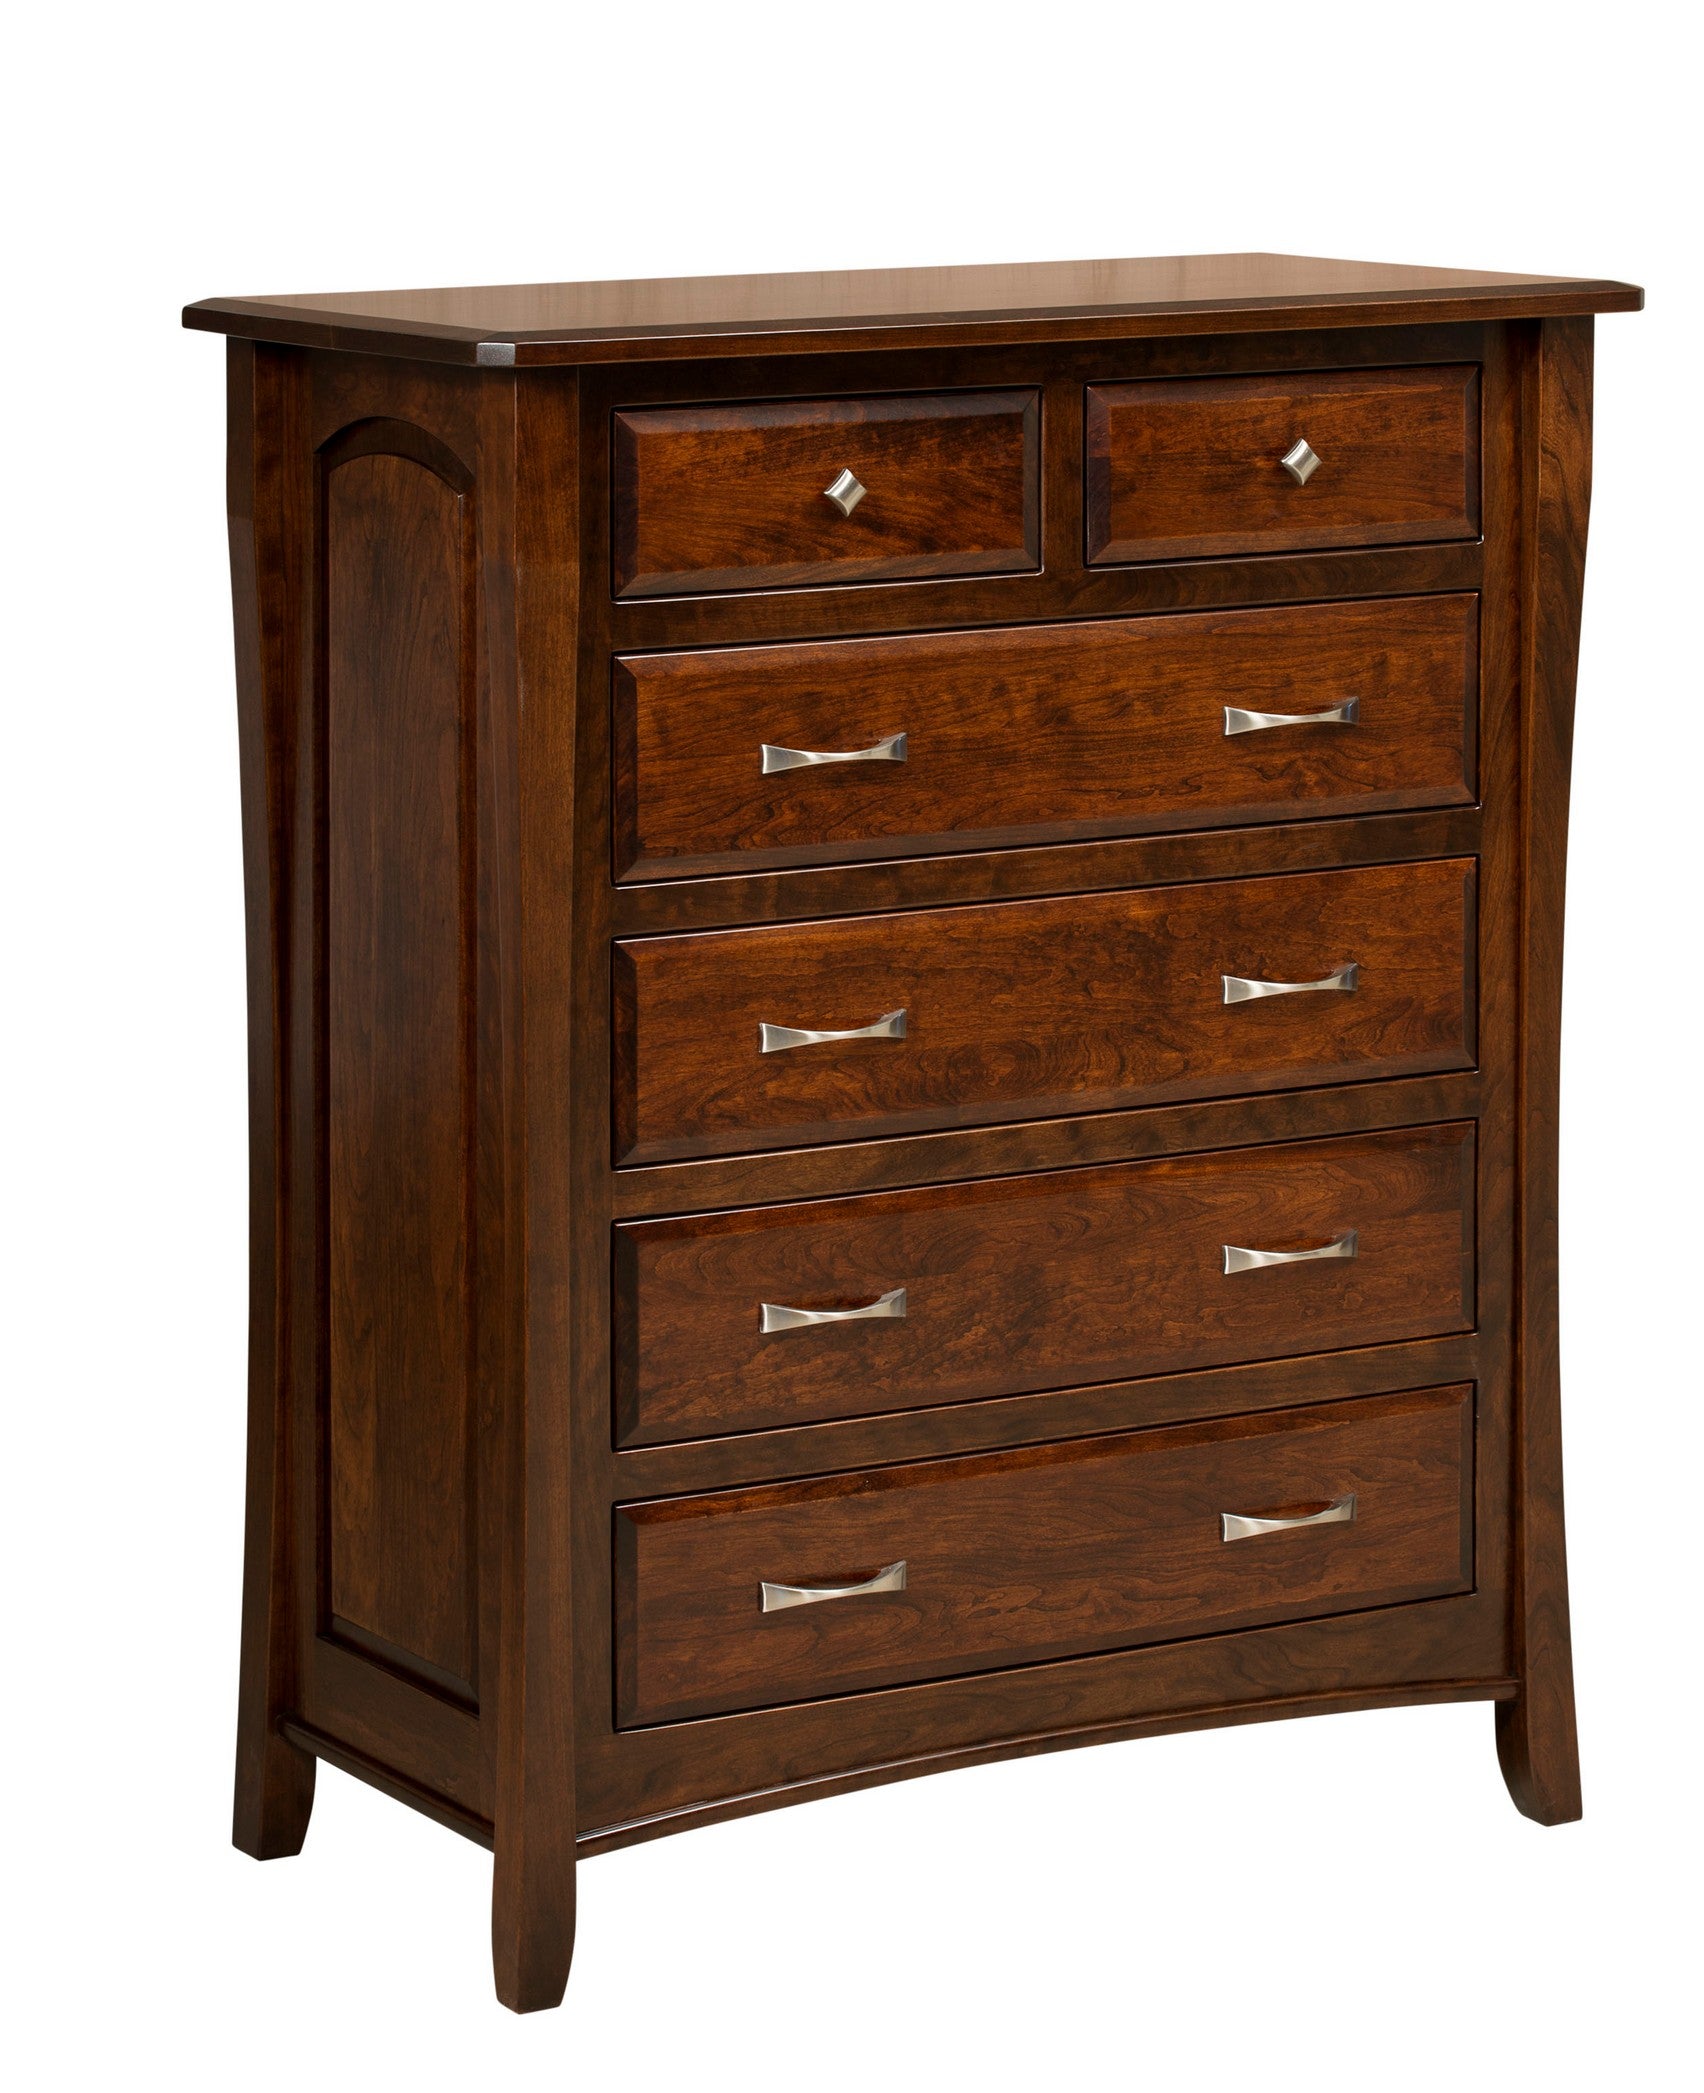 berkley six drawer chest in sap cherry wood with rich tobacco stain